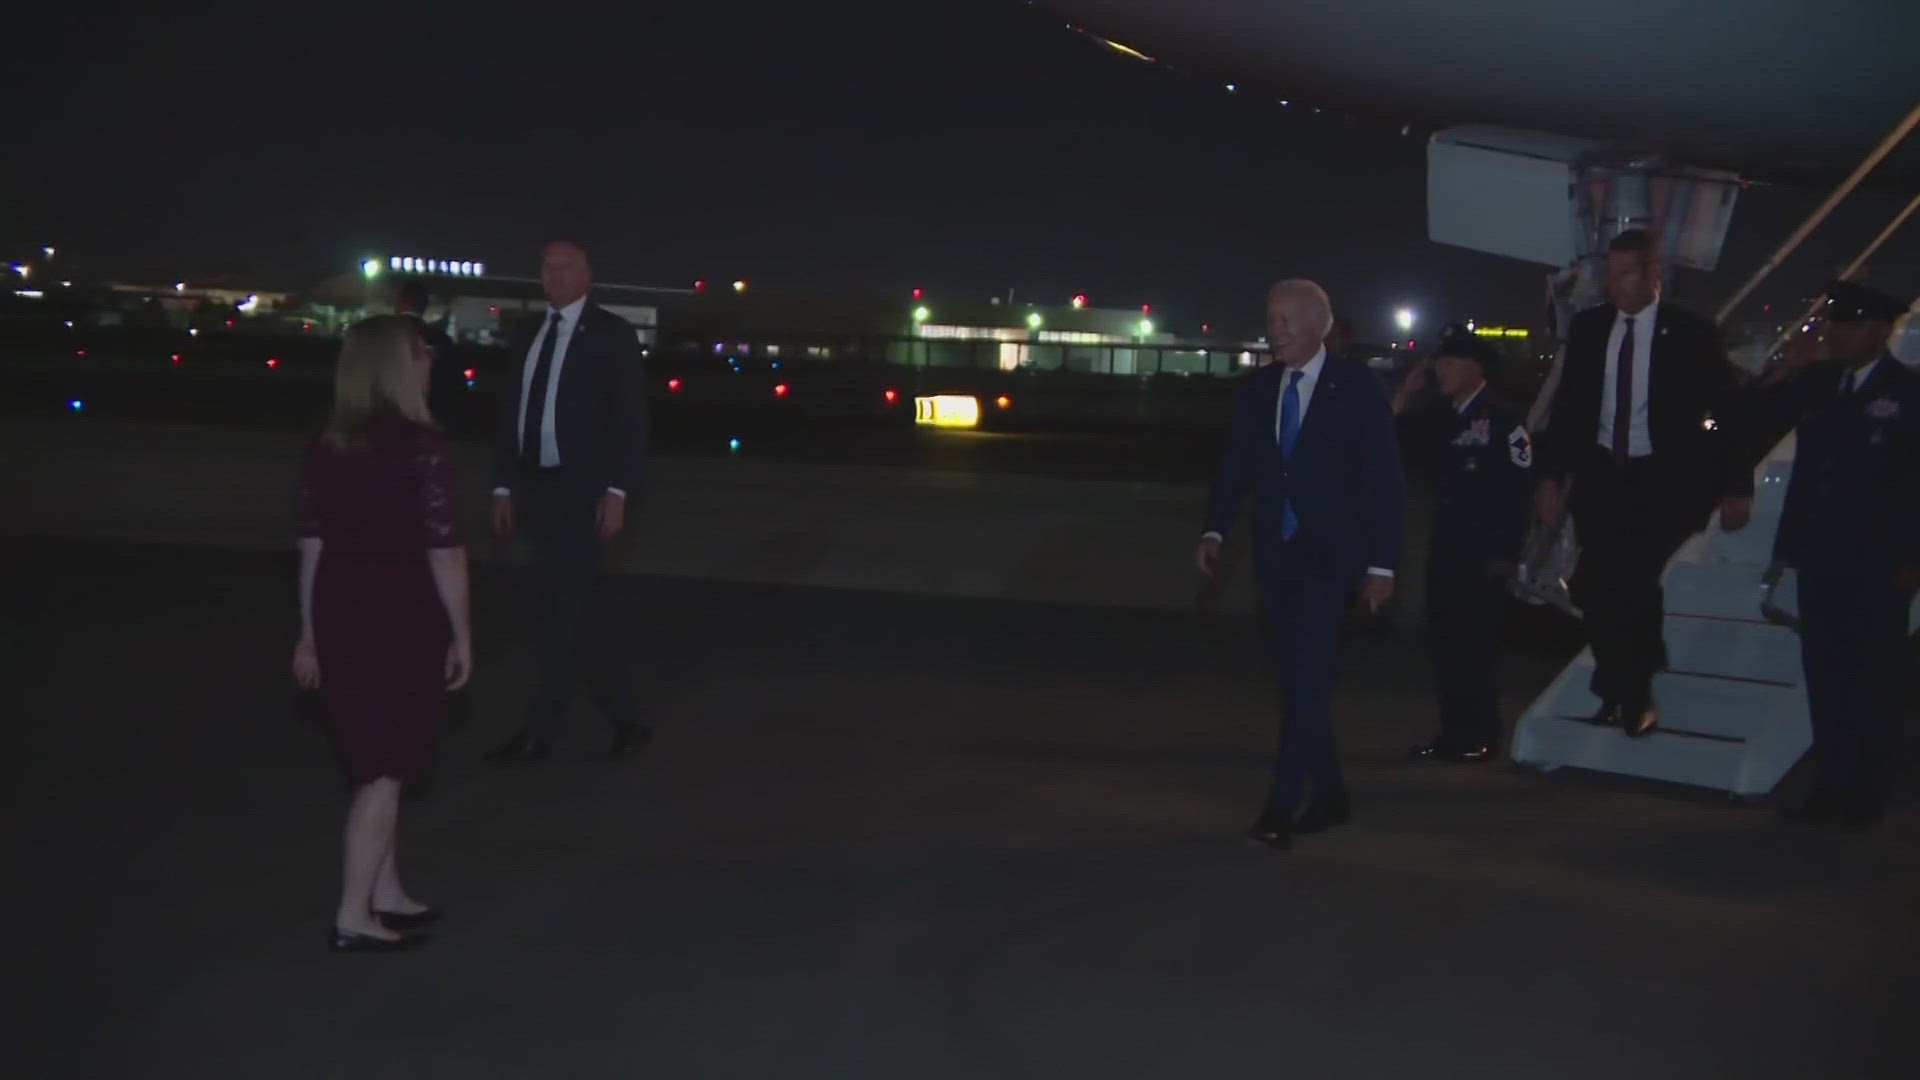 The president is in town to honor the late John McCain